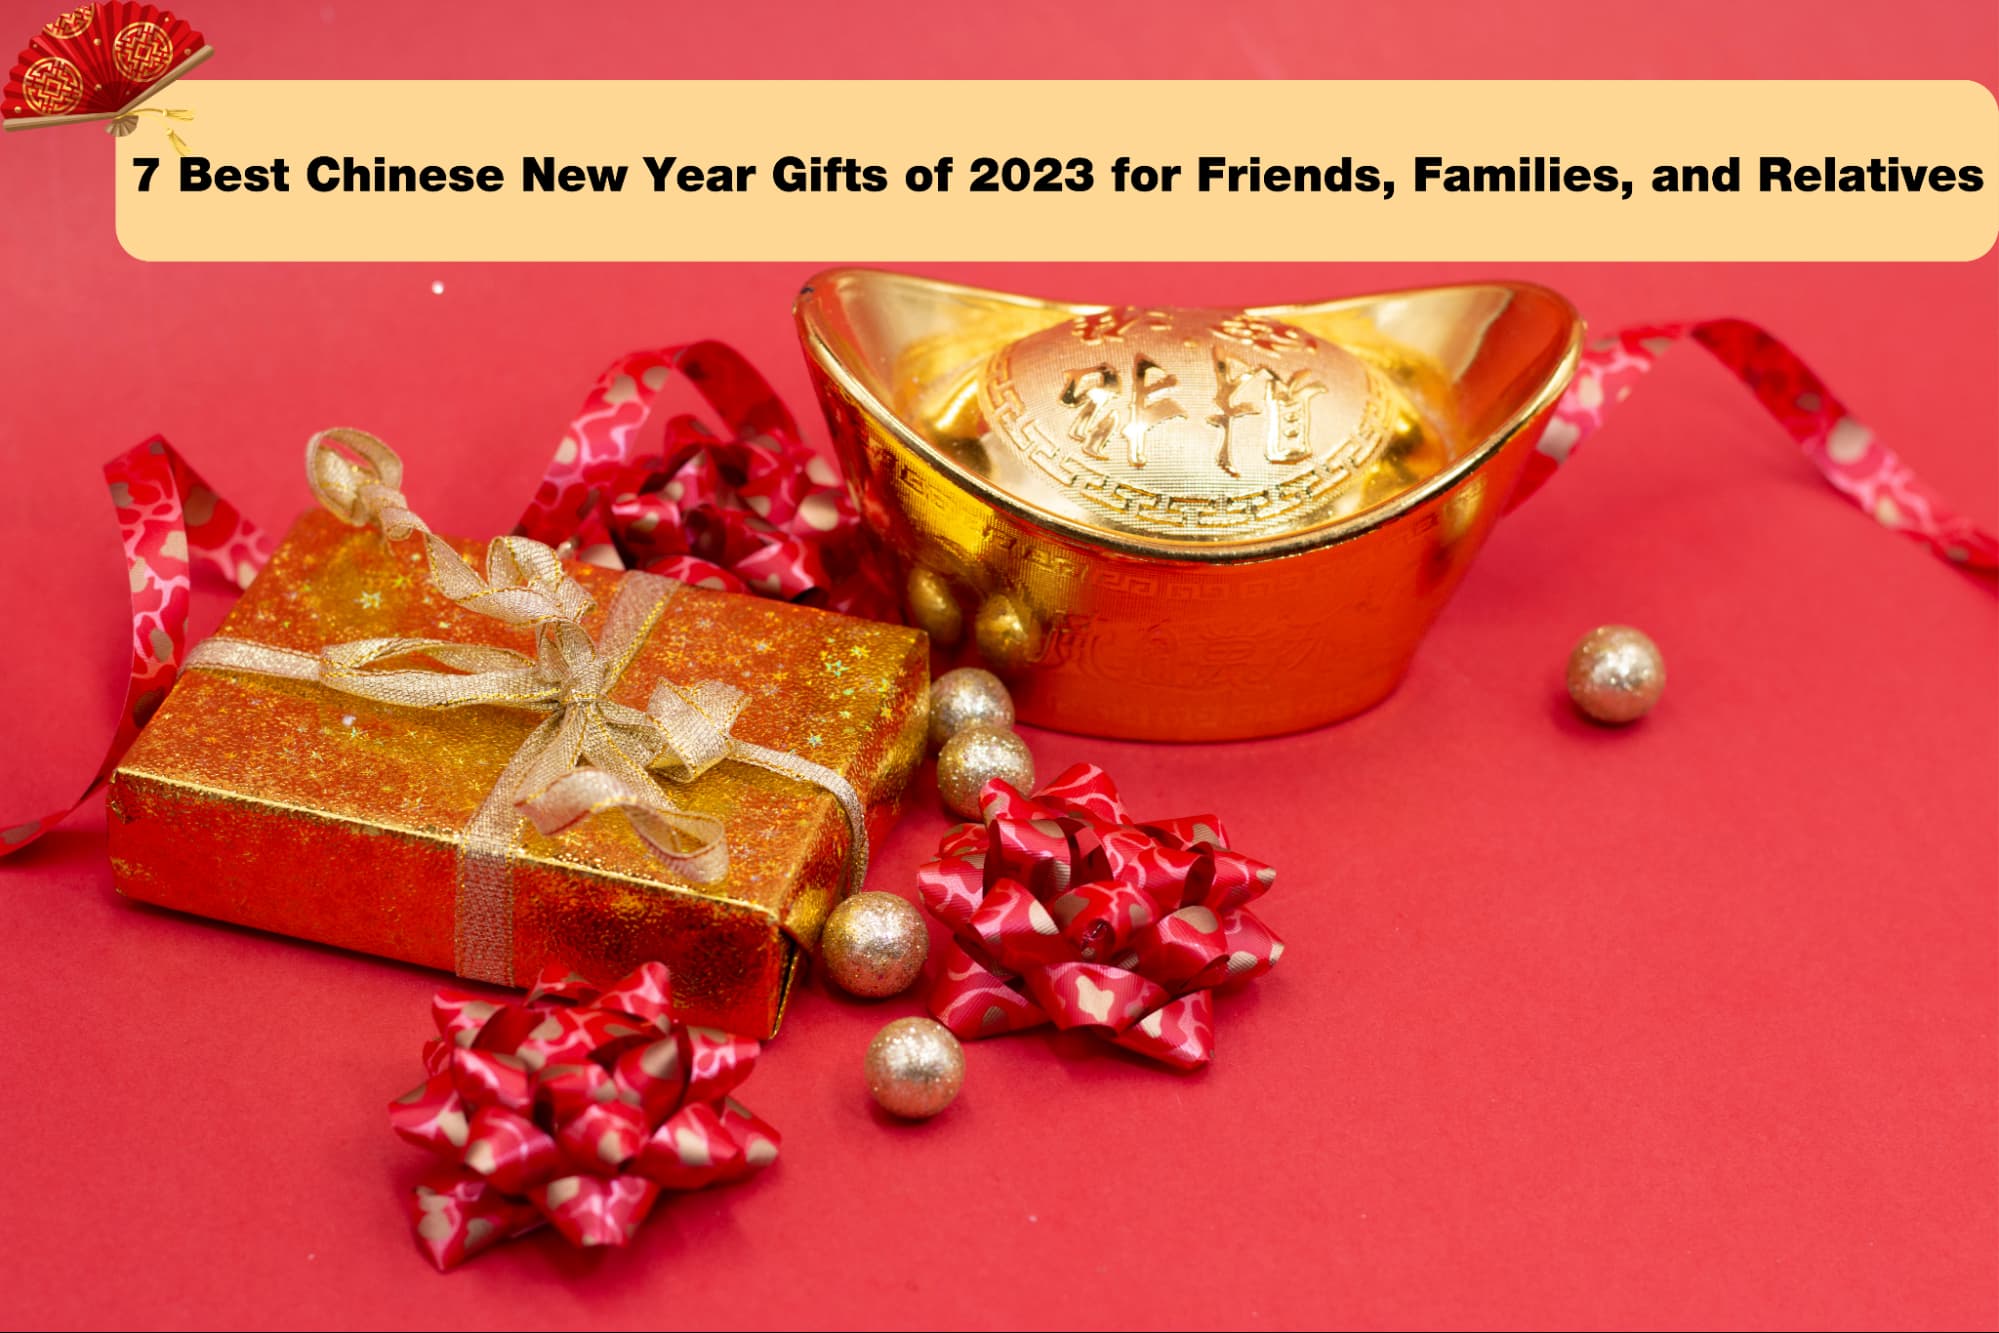 7 Best Chinese New Year Gifts in 2023 for Friends, Families and